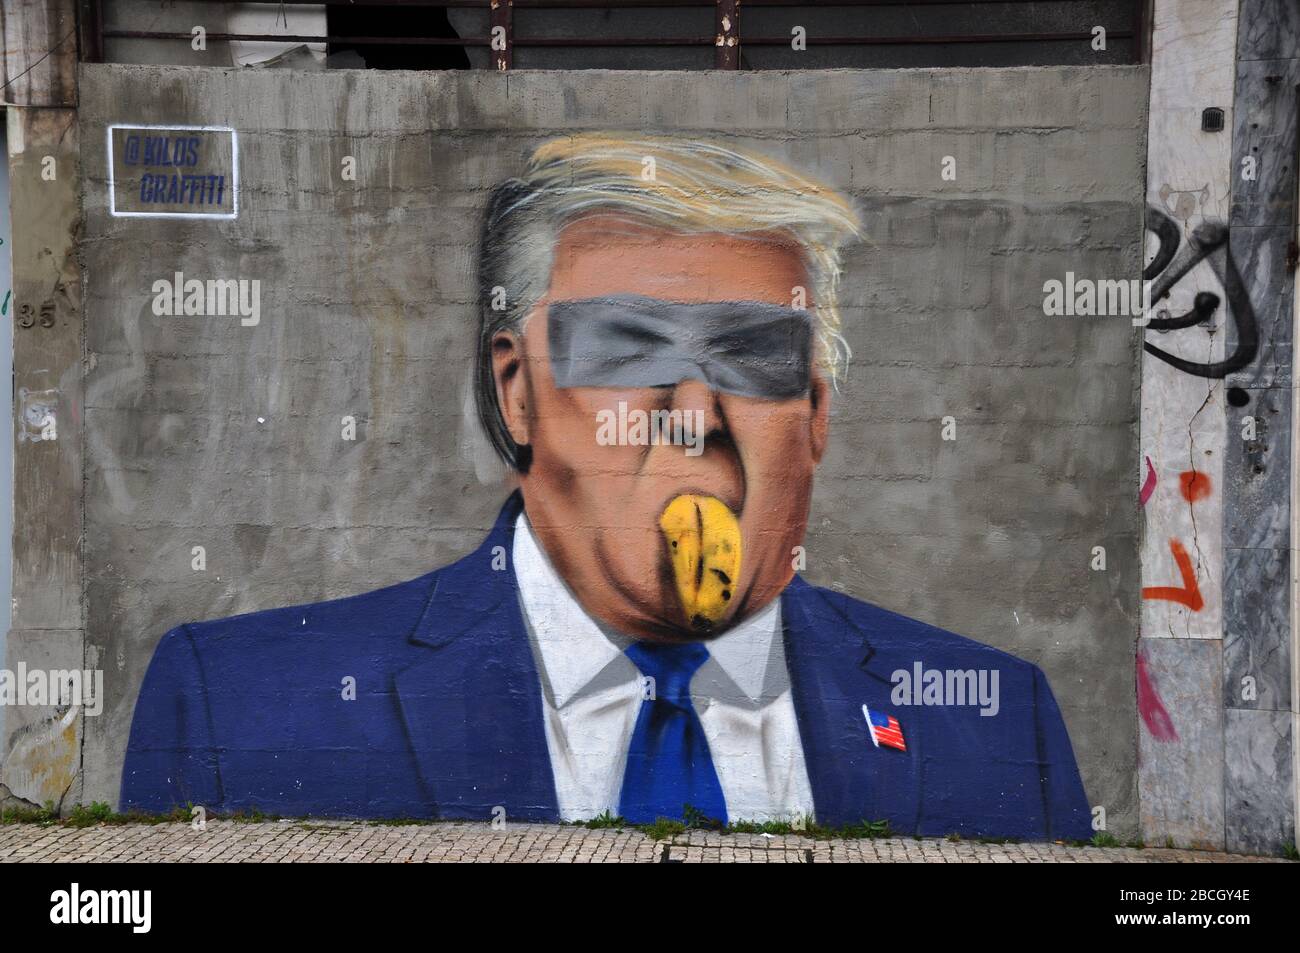 Trump blind and with banana Stock Photo